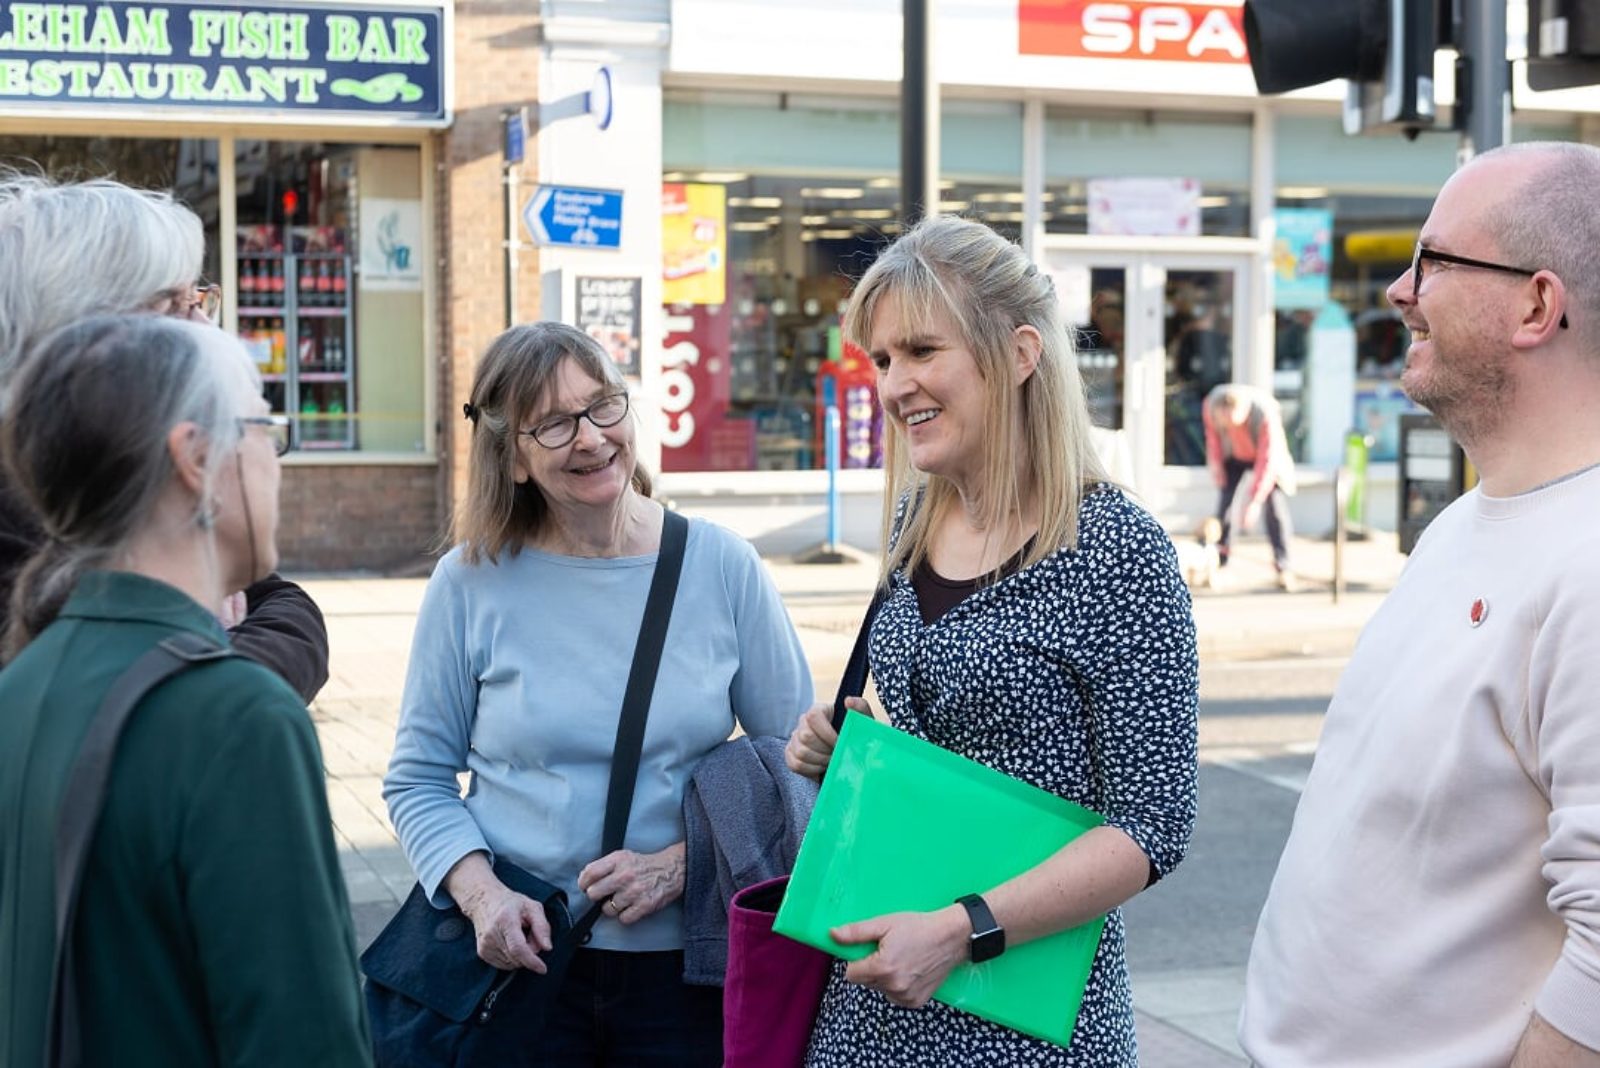 Labour candidate Kate Halliday campaigning in Bellevue 